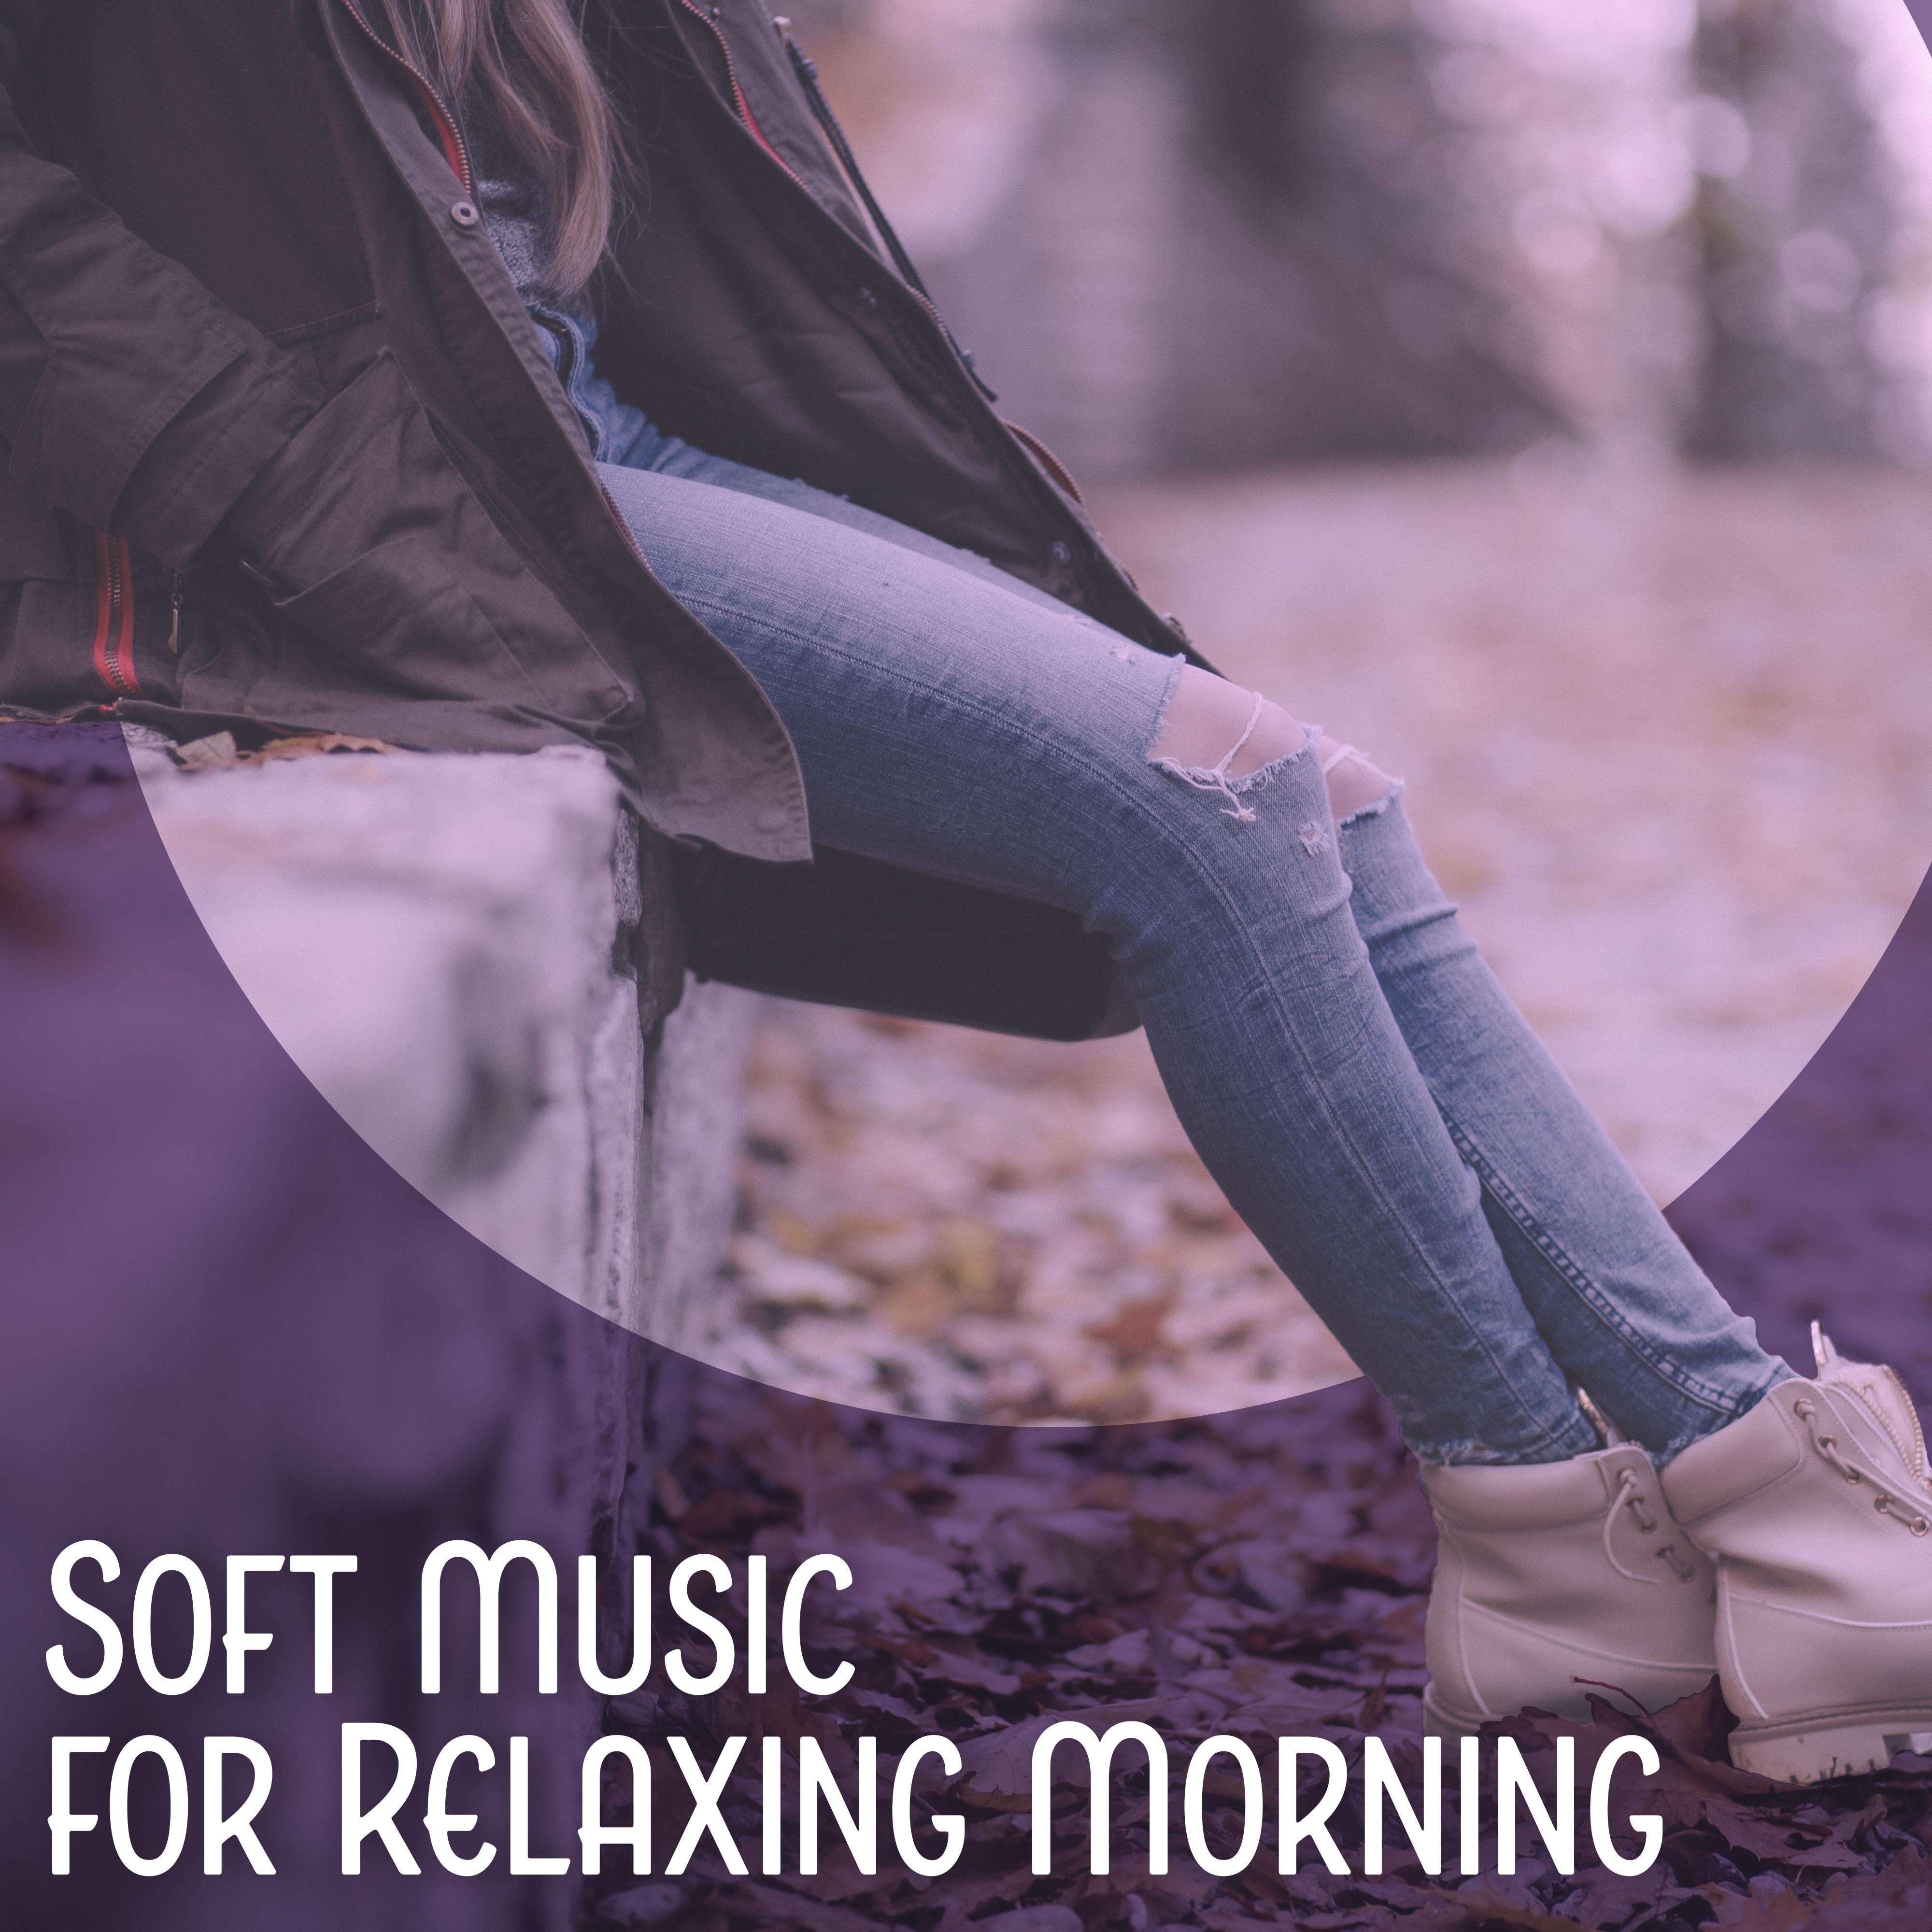 Soft Music for Relaxing Morning  Calming Sounds, New Age Relaxation, Peaceful Music, Rest a Bit